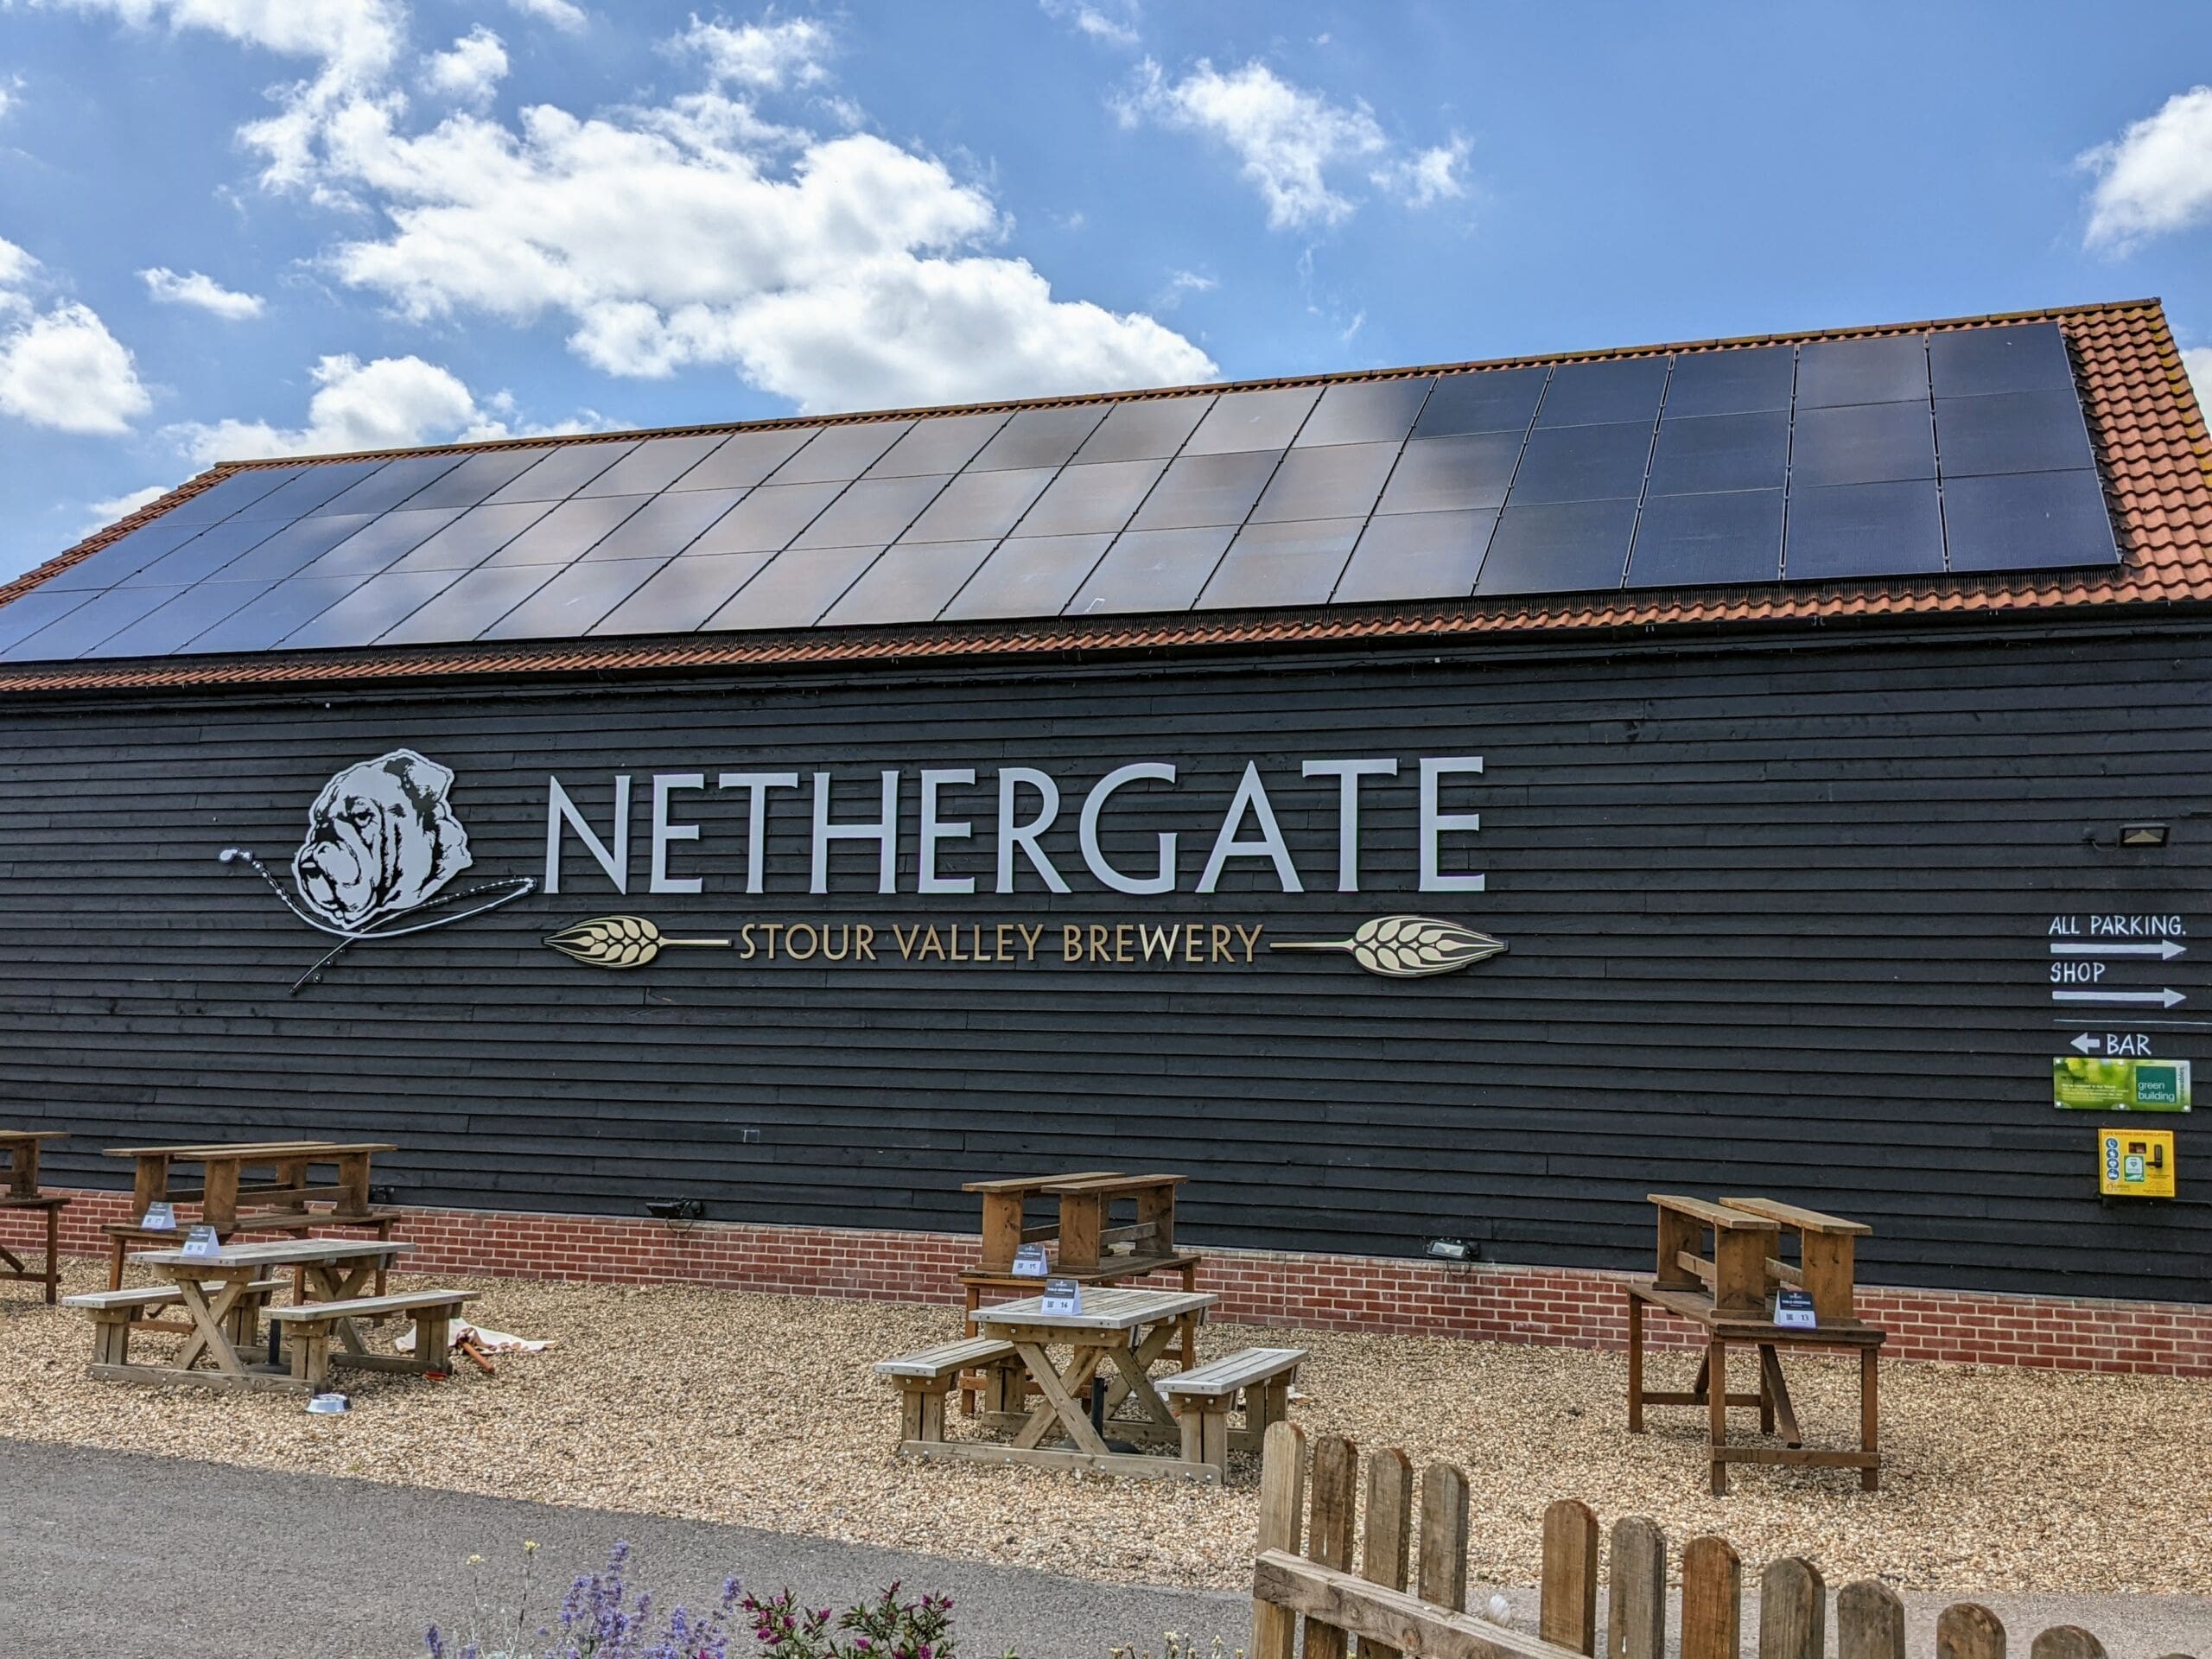 A building with 'Nethergate' written across the front and solar panels on the roof